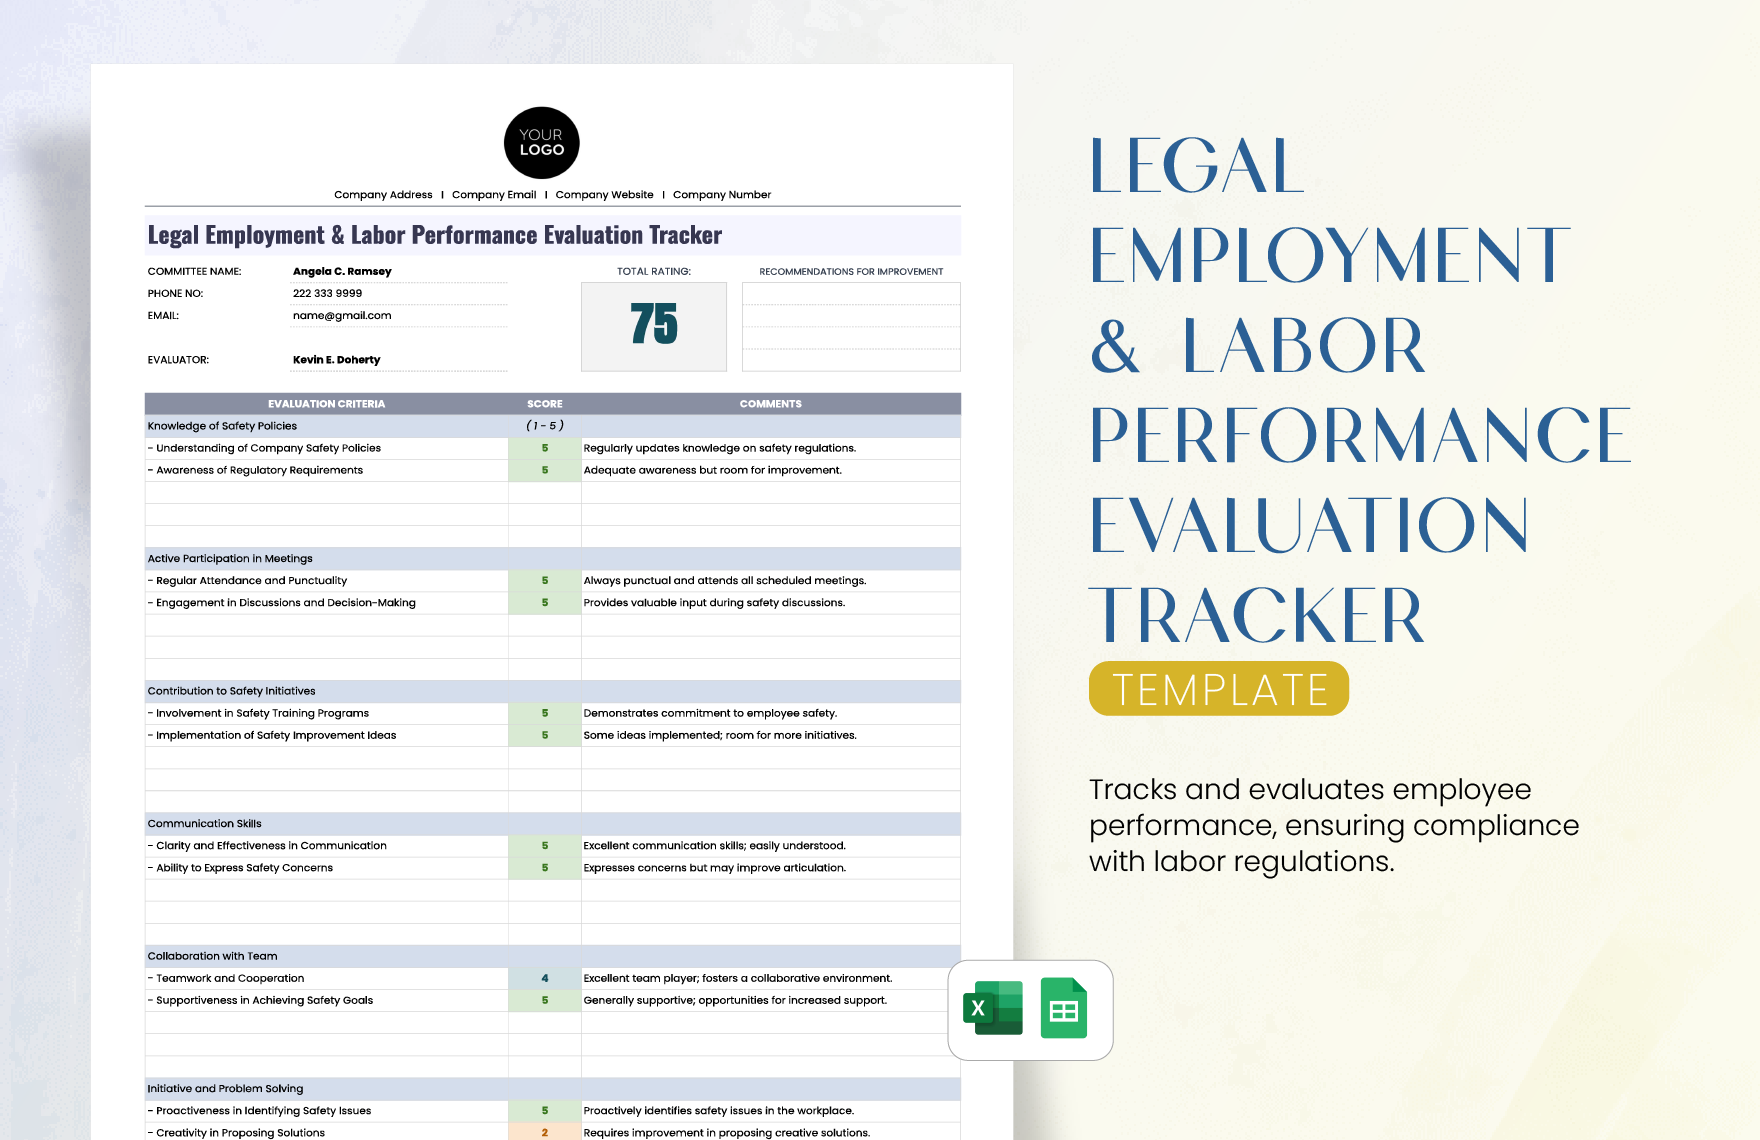 Legal Employment & Labor Performance Evaluation Tracker Template in Excel, Google Sheets